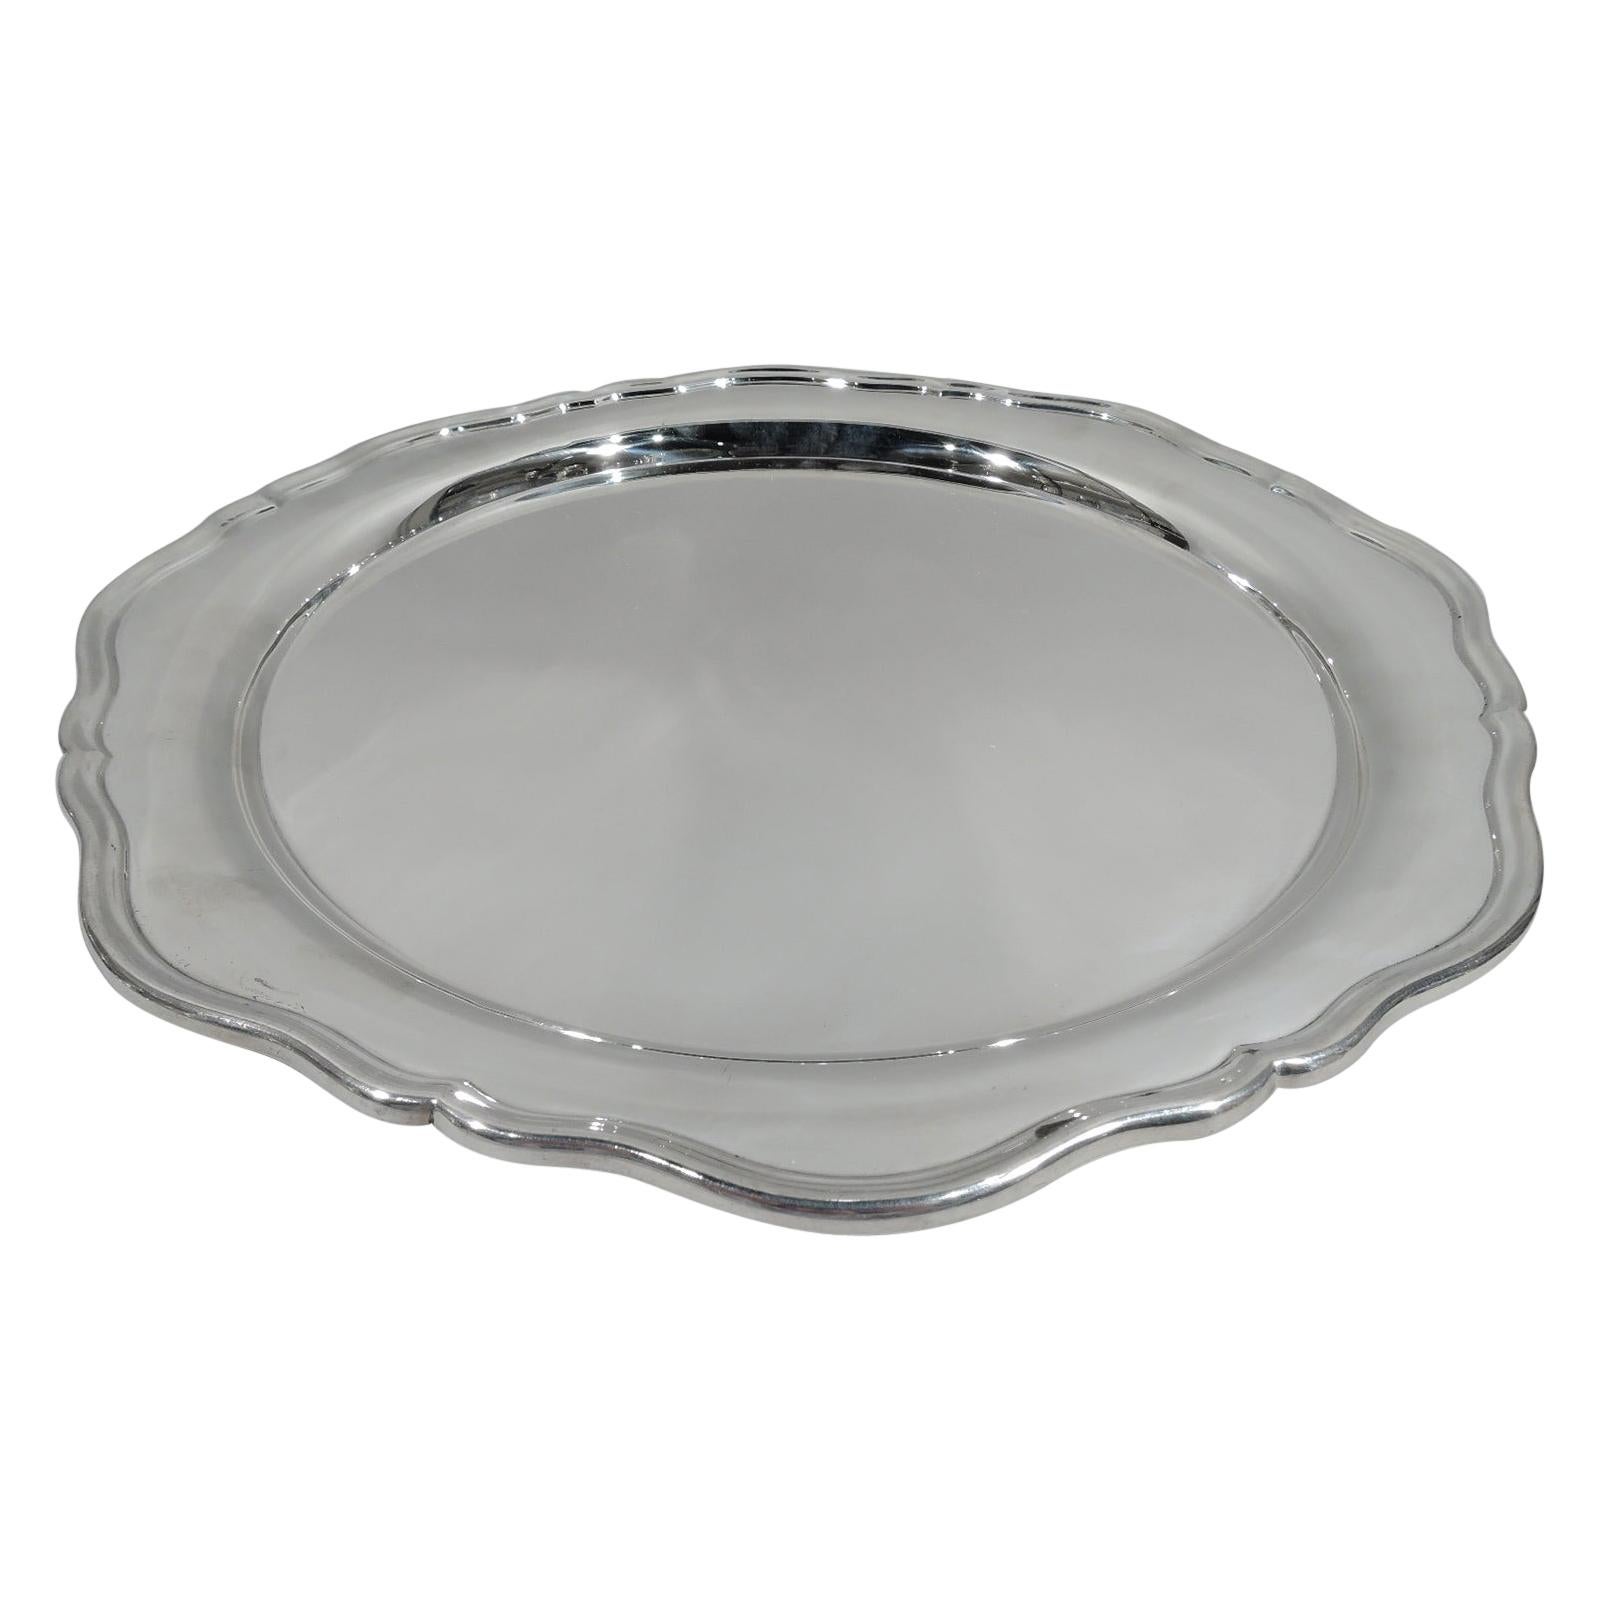 Pretty Old-Fashioned English Sterling Silver Serving Tray